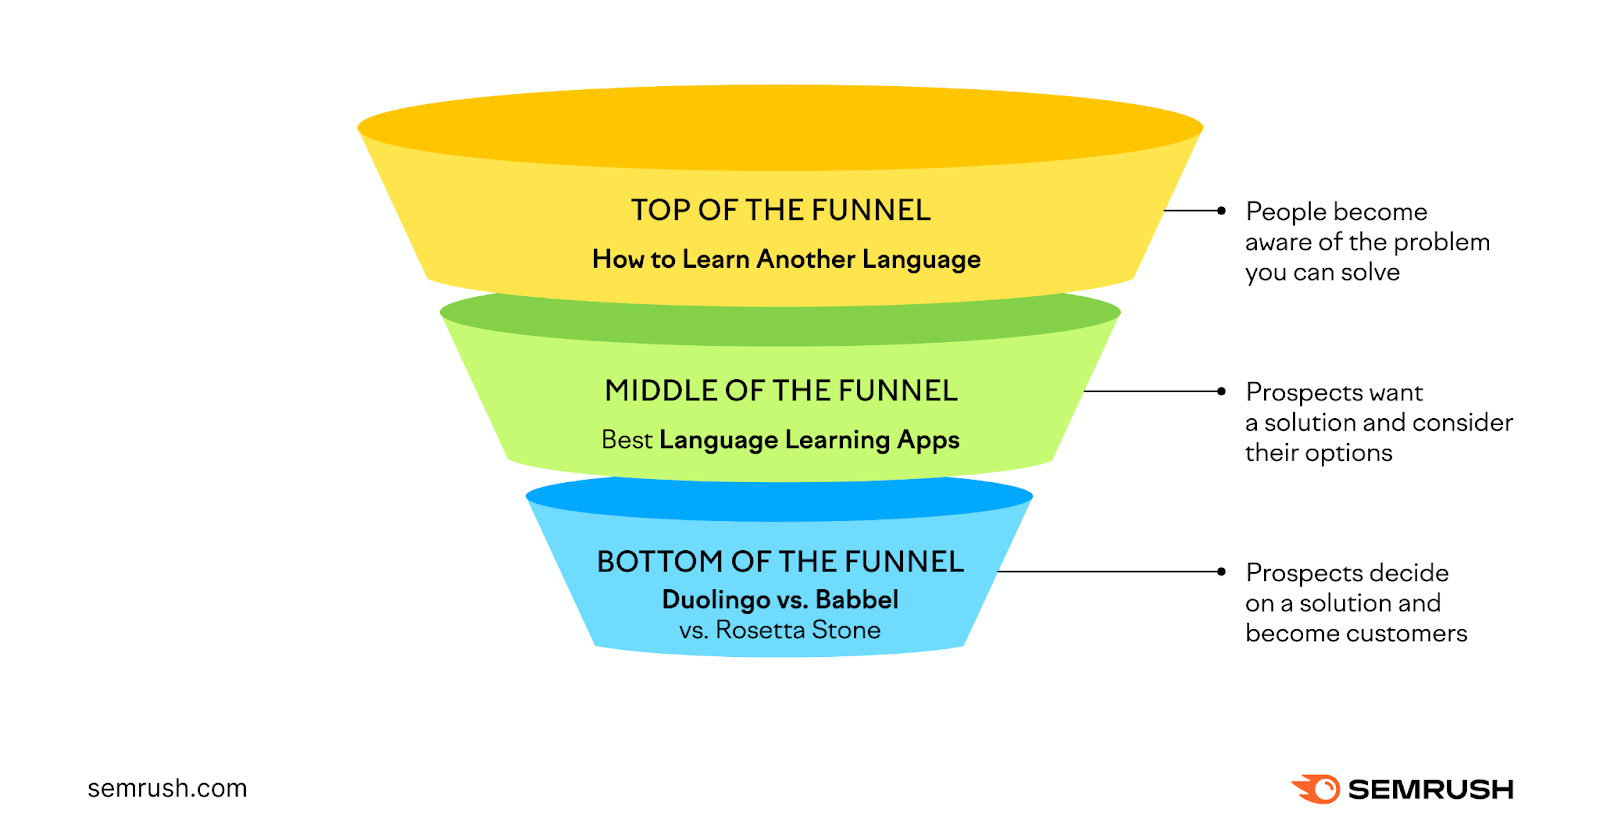 Top of funnel, for example, is a blog titled How to Learn Another Language. Middle of funnel is Best Language Learning Apps. Bottom of funnel is Duolingo vs Babbel vs Rosetta Stone.